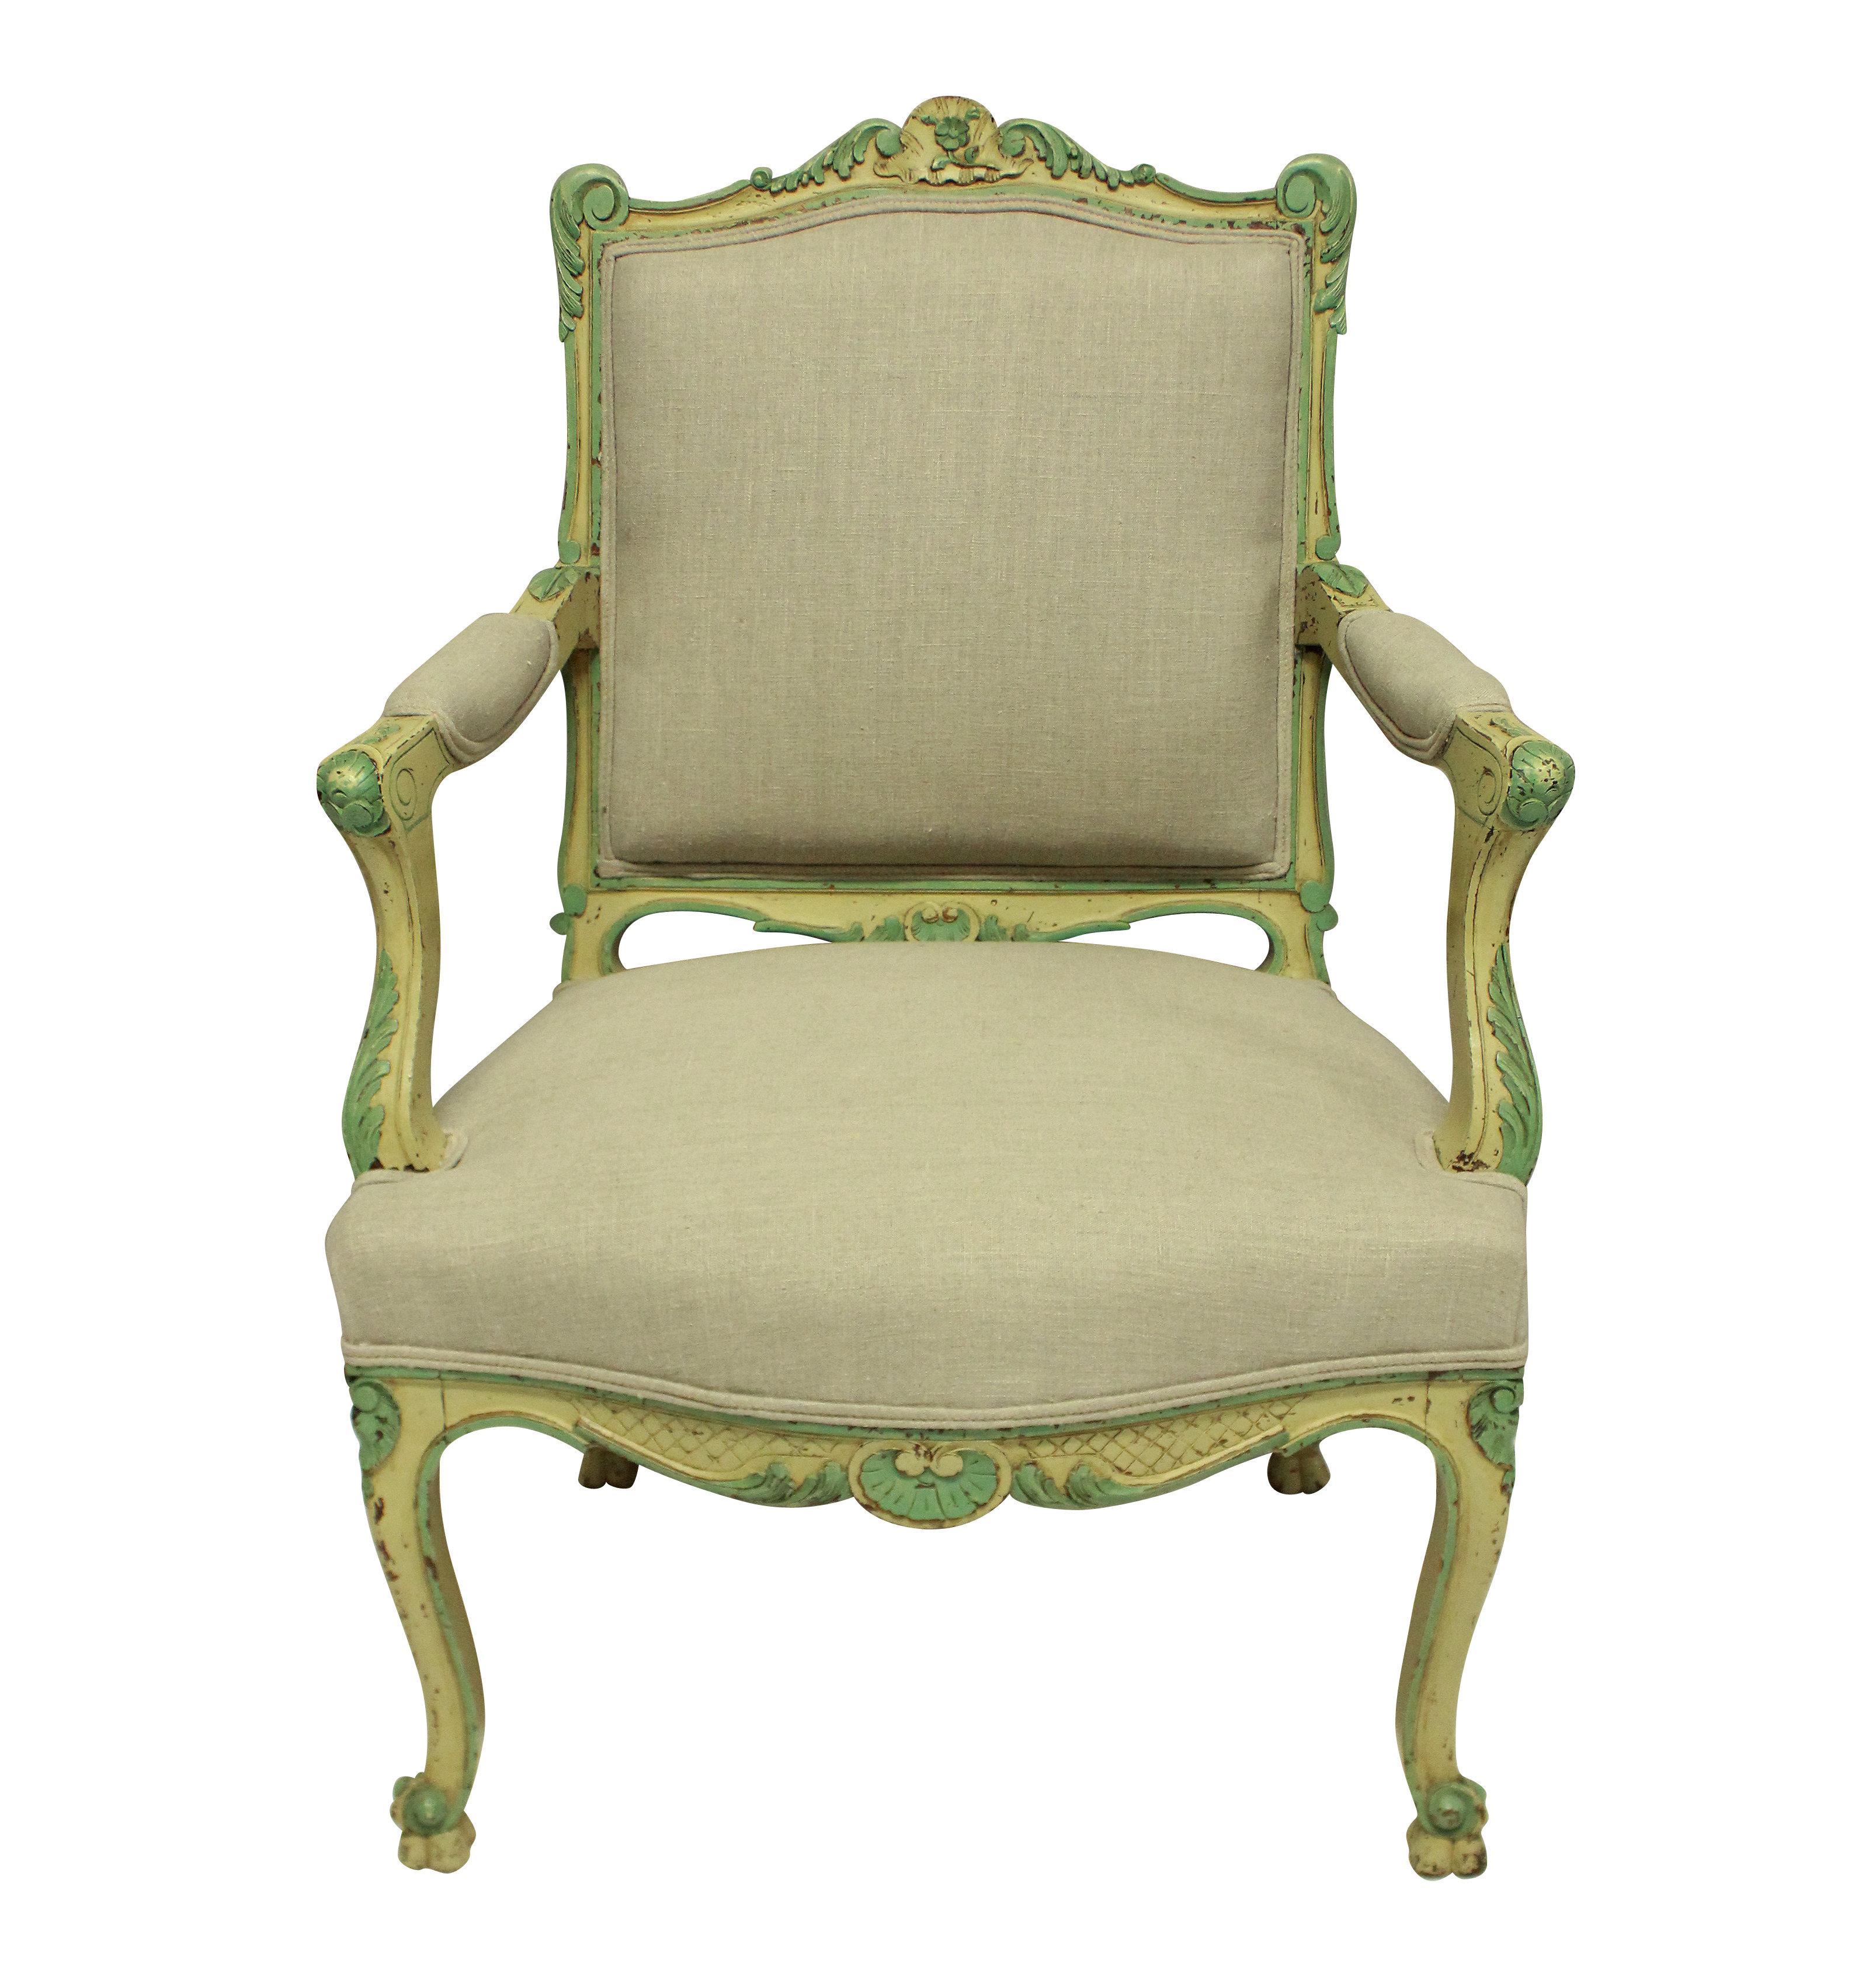 A pair of French Louis XV style walnut armchairs, painted in the 1930s in pale yellows and greens. Newly upholstered in raw linen.